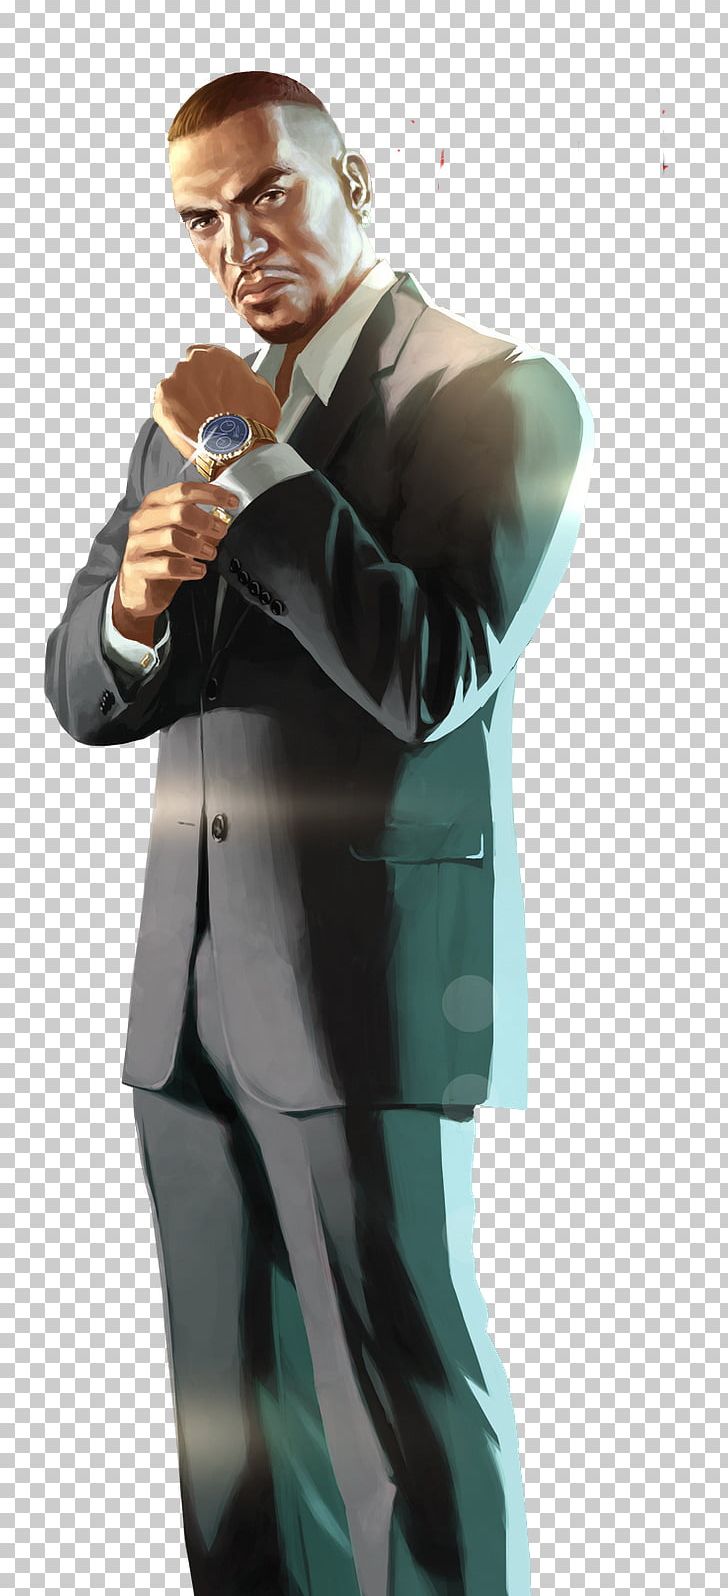 Grand Theft Auto: The Ballad Of Gay Tony Grand Theft Auto: Episodes From Liberty City Grand Theft Auto V Grand Theft Auto: San Andreas Grand Theft Auto IV: The Lost And Damned PNG, Clipart, Formal Wear, Gentleman, Grand Theft, Grand Theft Auto, Grand Theft Auto Vice City Free PNG Download